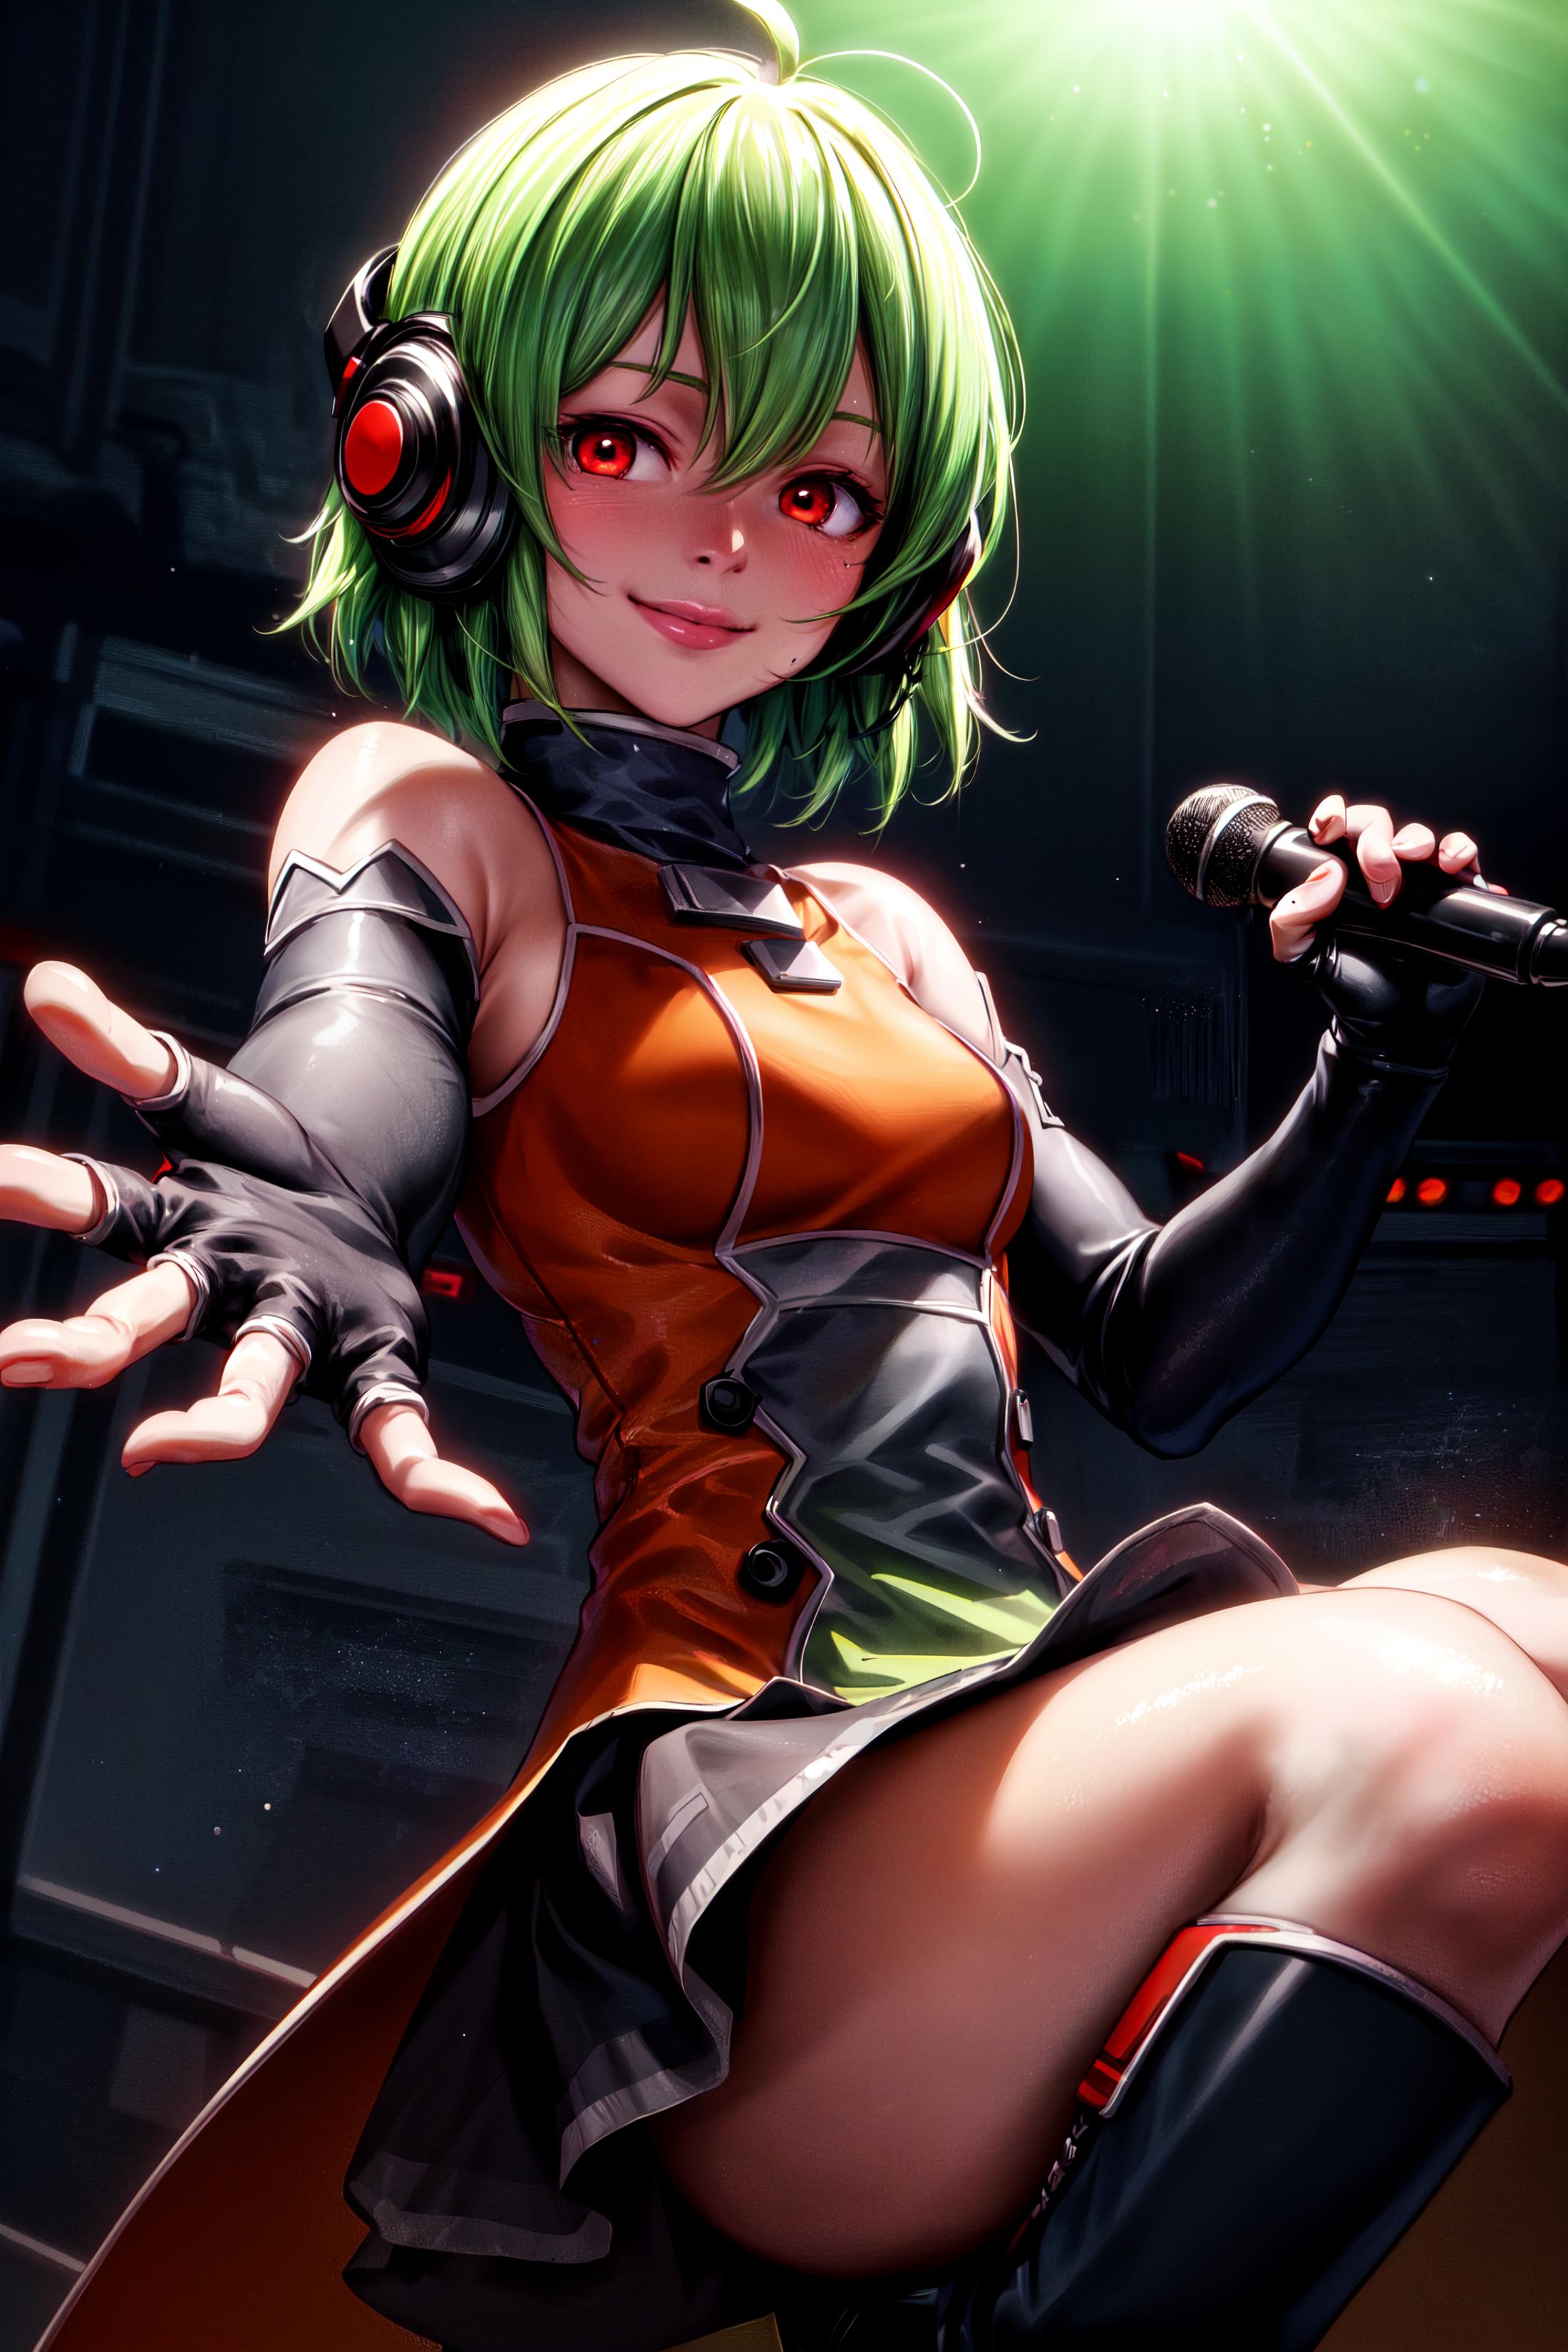 FL Chan / FL Studio Chan [With Chibi support!] image by Shed_The_Skin